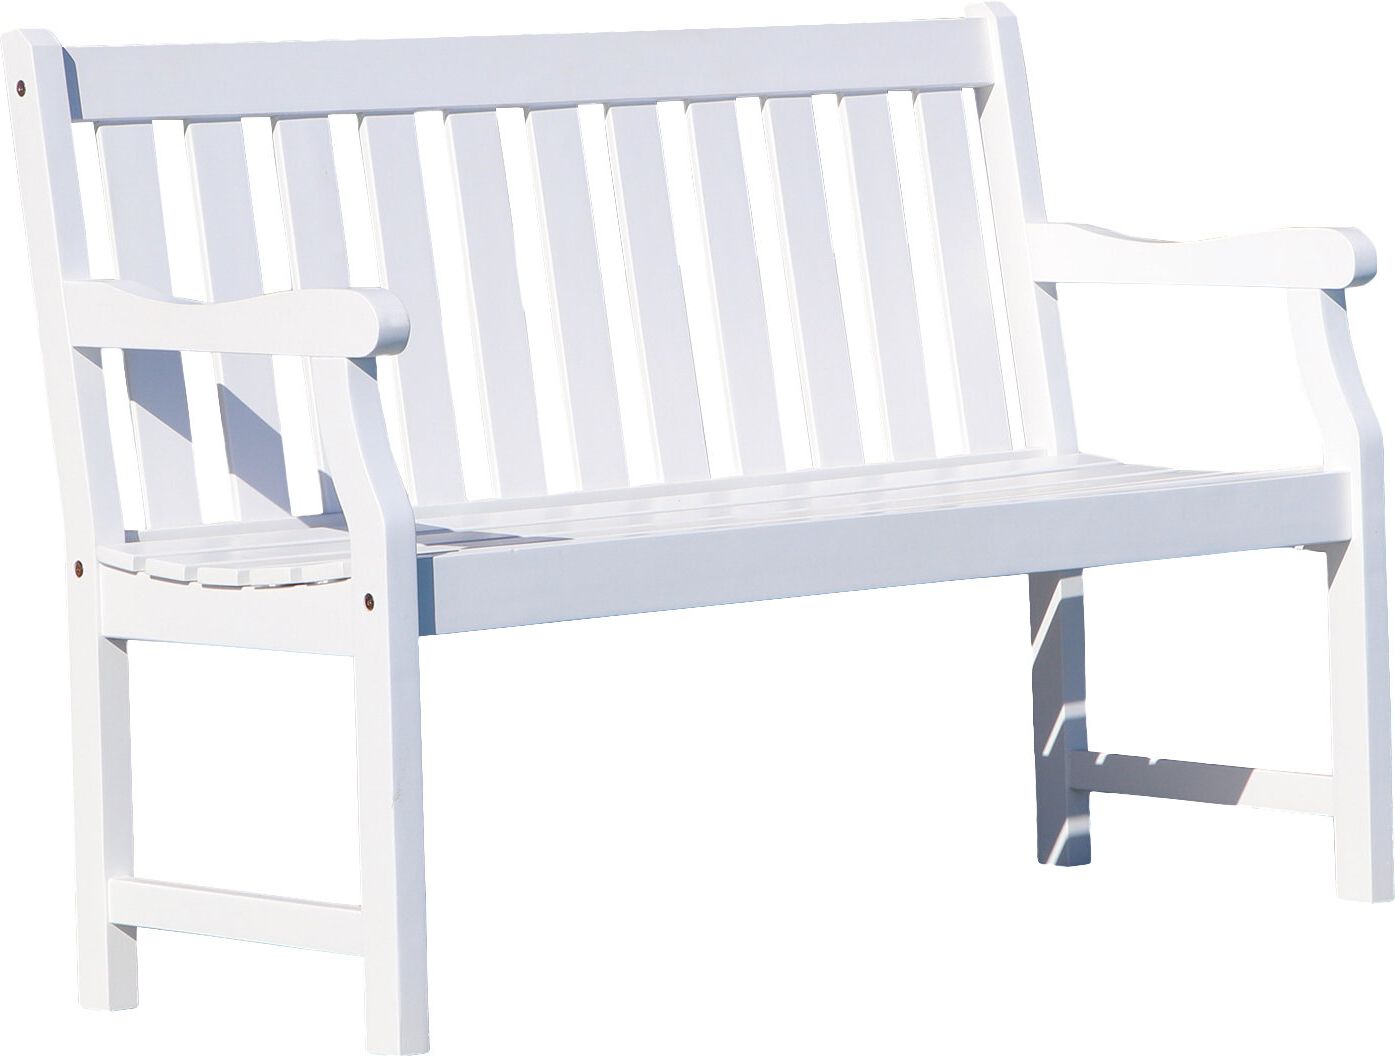 Newest Andromeda Wooden Garden Bench Within Amabel Wooden Garden Benches (View 15 of 30)